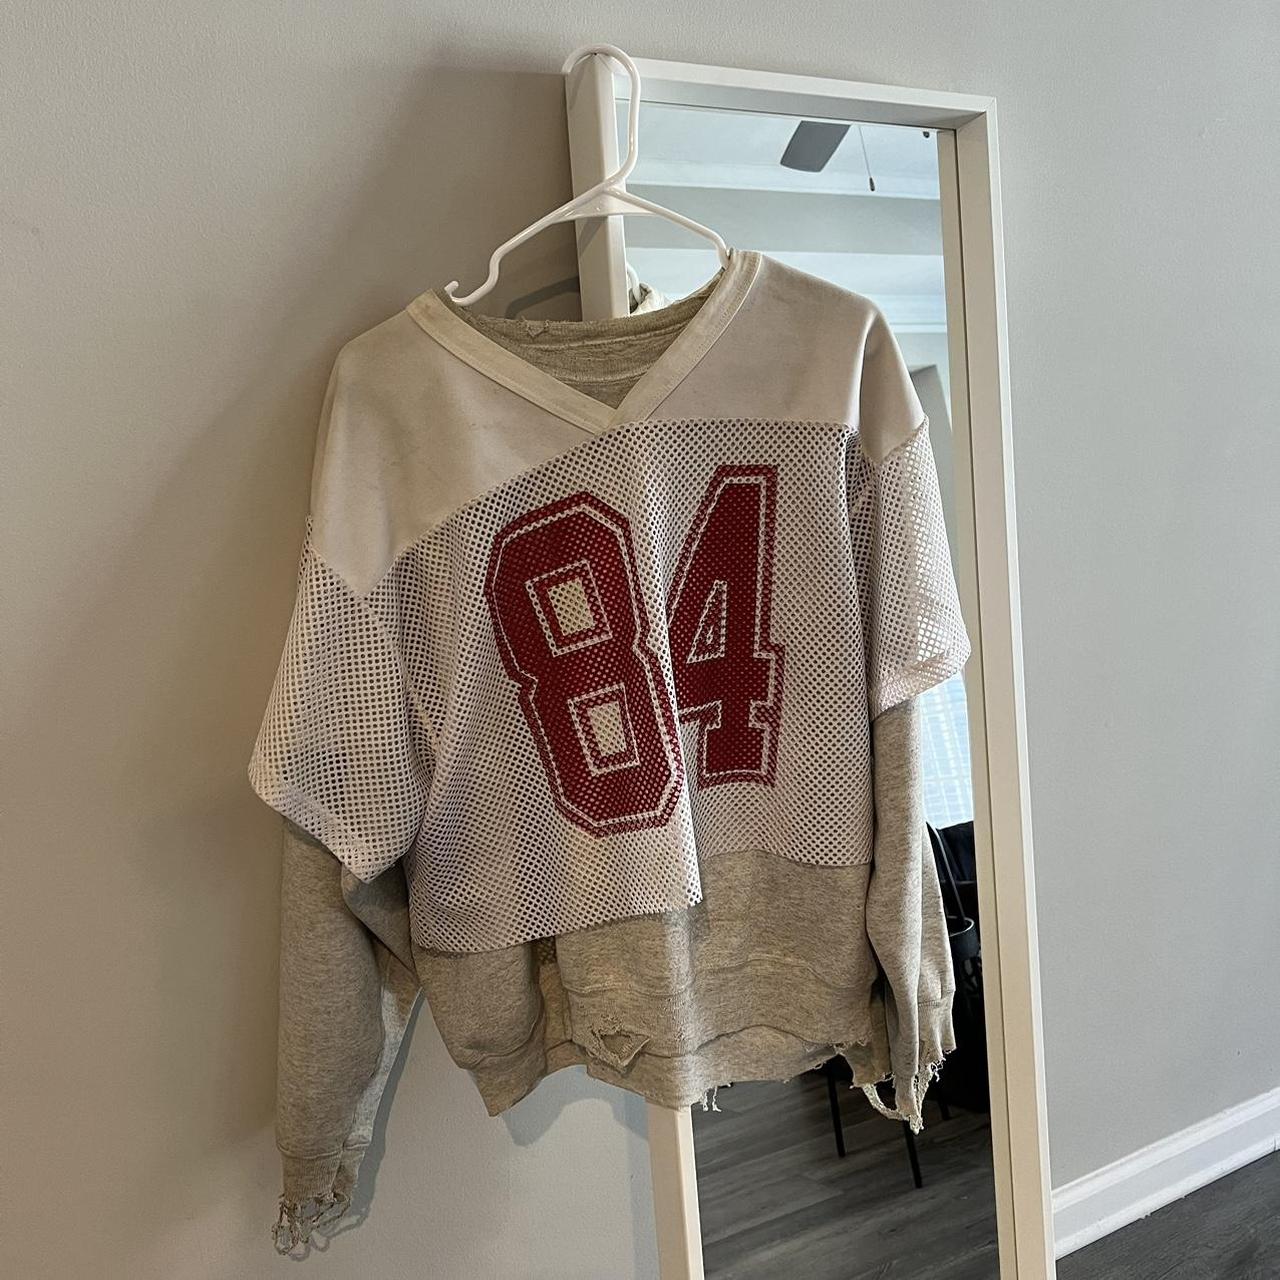 Product Image 1 - Oversized  sweater. It’s made